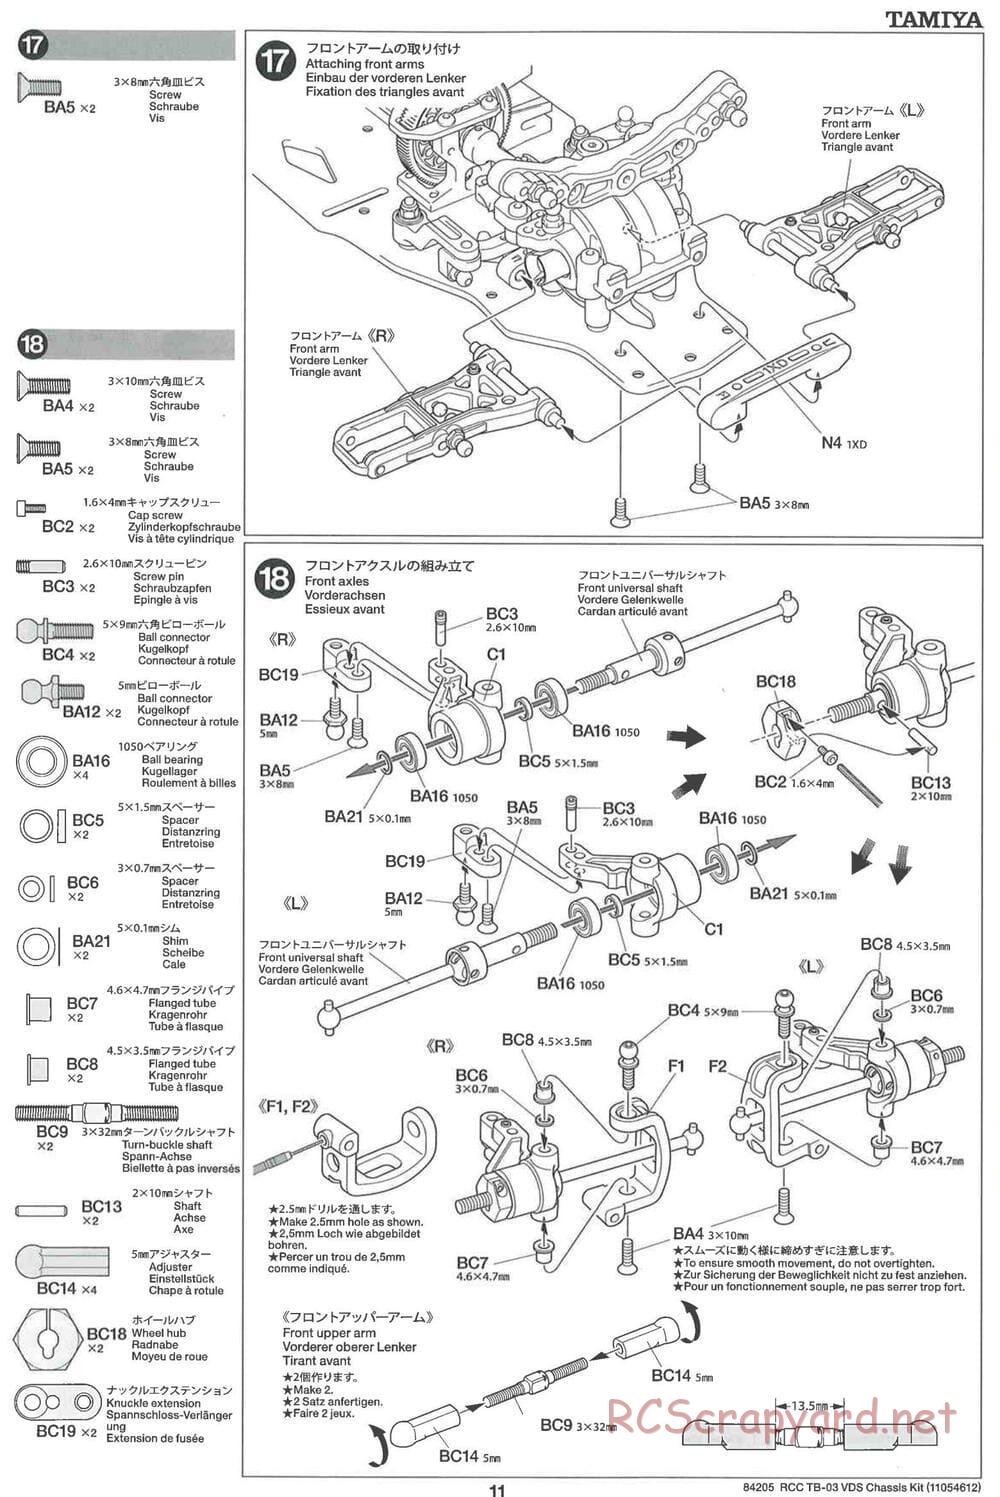 Tamiya - TB-03 VDS Drift Spec Chassis - Manual - Page 11